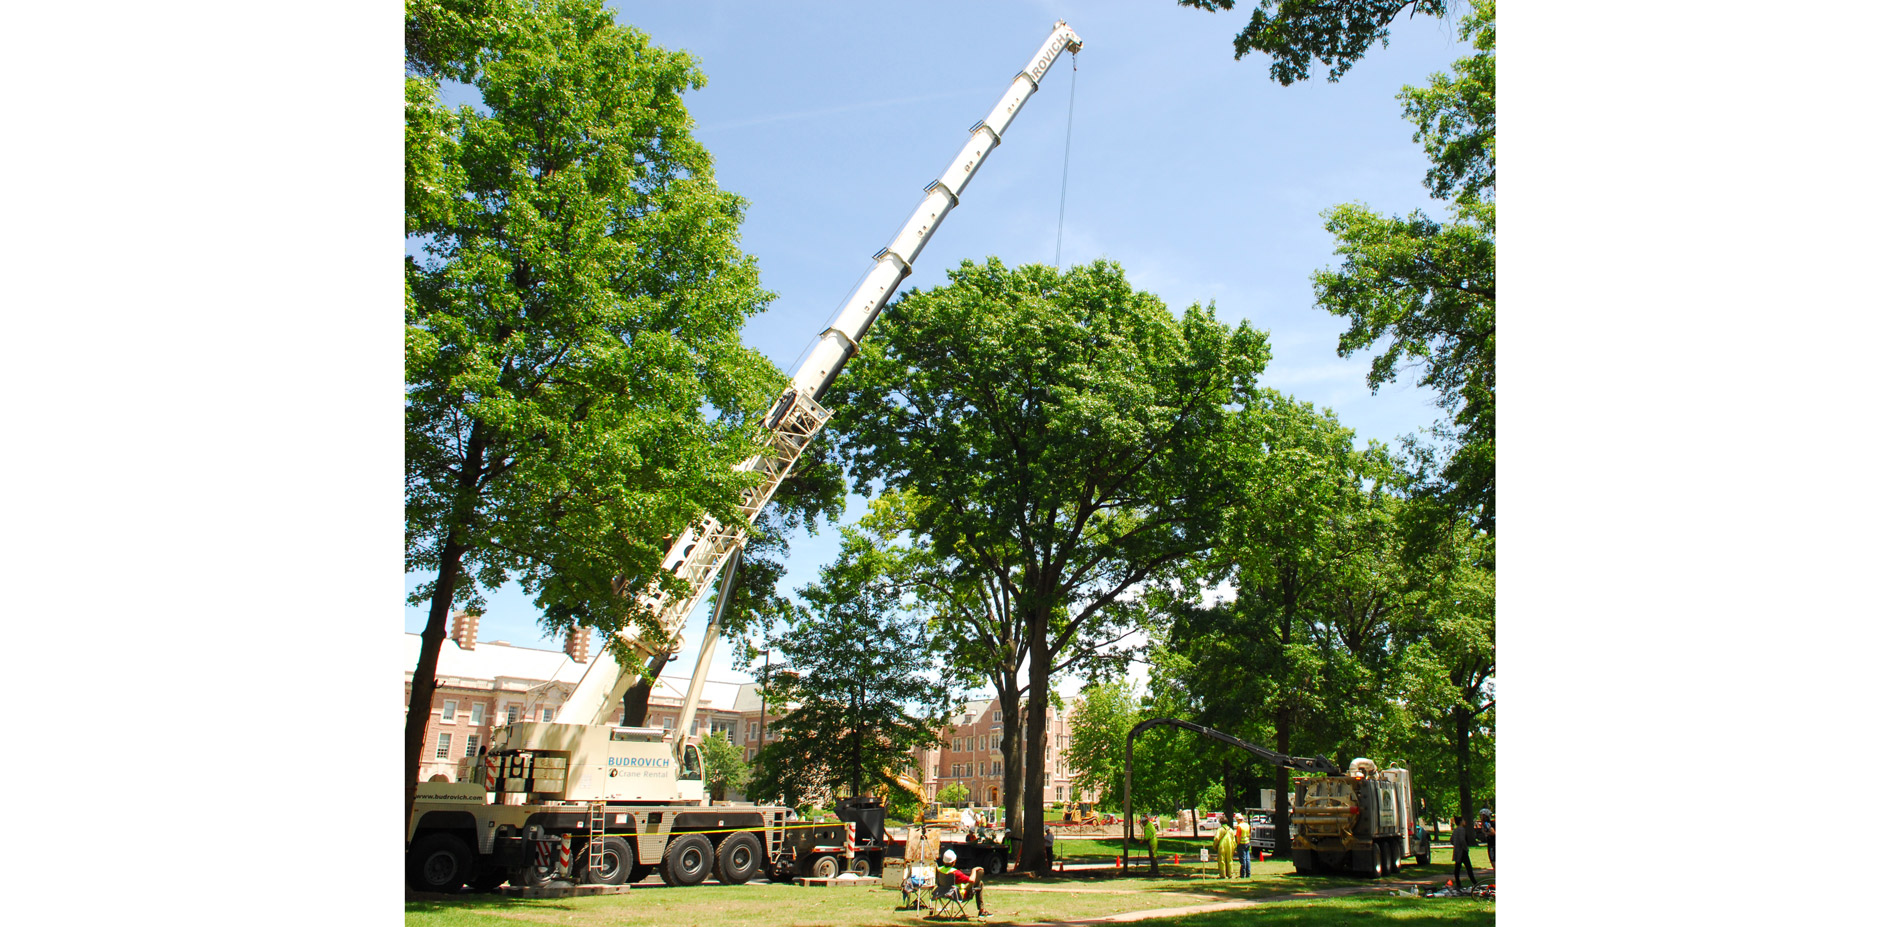 On the day after commencement, the community was invited to a ritual tree-felling centered around the One Tree. An 85-ton crane was connected to the t…